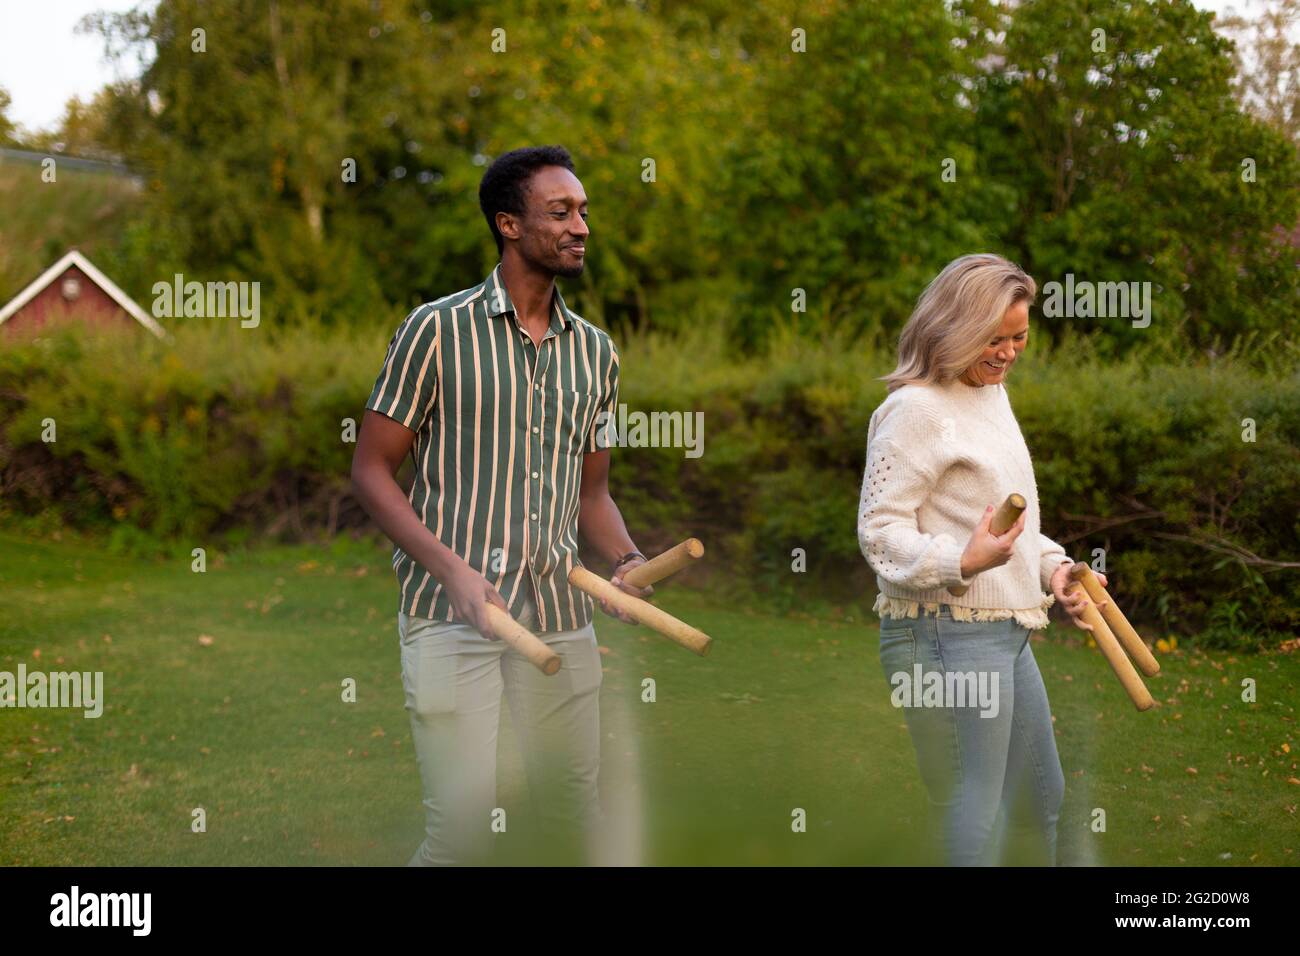 Man and woman playing molkky game in park Stock Photo